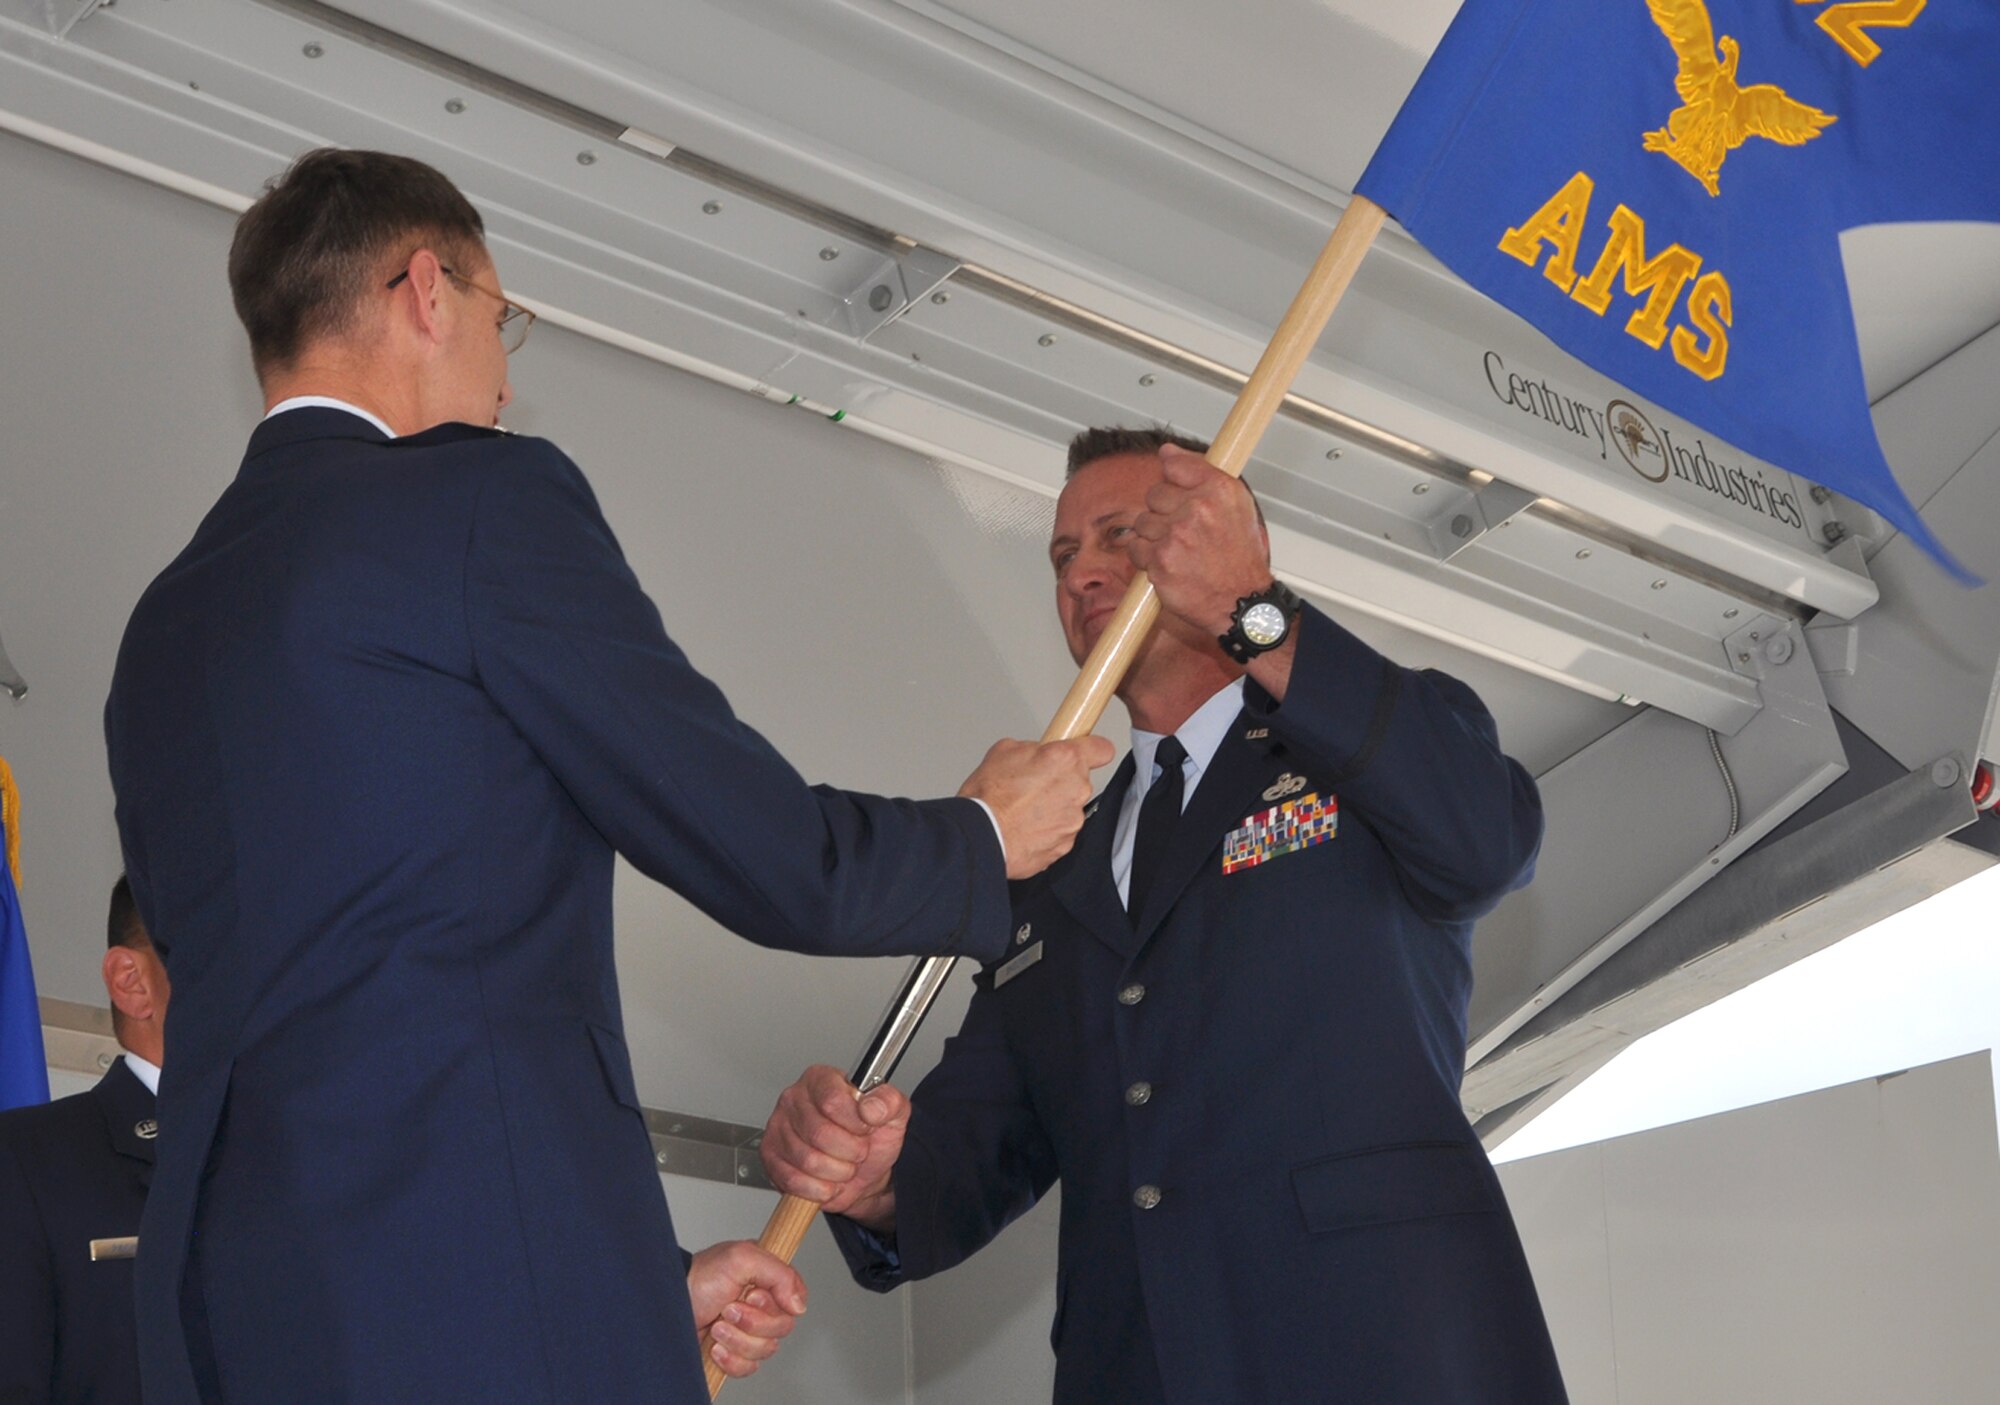 Capt. Collin "Bo" Shelton (right) takes the 302nd Aircraft Maintenance Squadron guidon from Col. James Van Housen, 302nd Maintenance Group commander, as he assumed command of the squadron during a July 11 ceremony at Peterson Air Force Base, Colo. "Captain Shelton has strong leadership and embodies Air Force core values," said Colonel Van Housen. "There is a promising future for [the] aircraft maintenance squadron with Captain Shelton as [its] commander." (U.S. Air Force photo/Tech. Sgt. Daniel Butterfield)